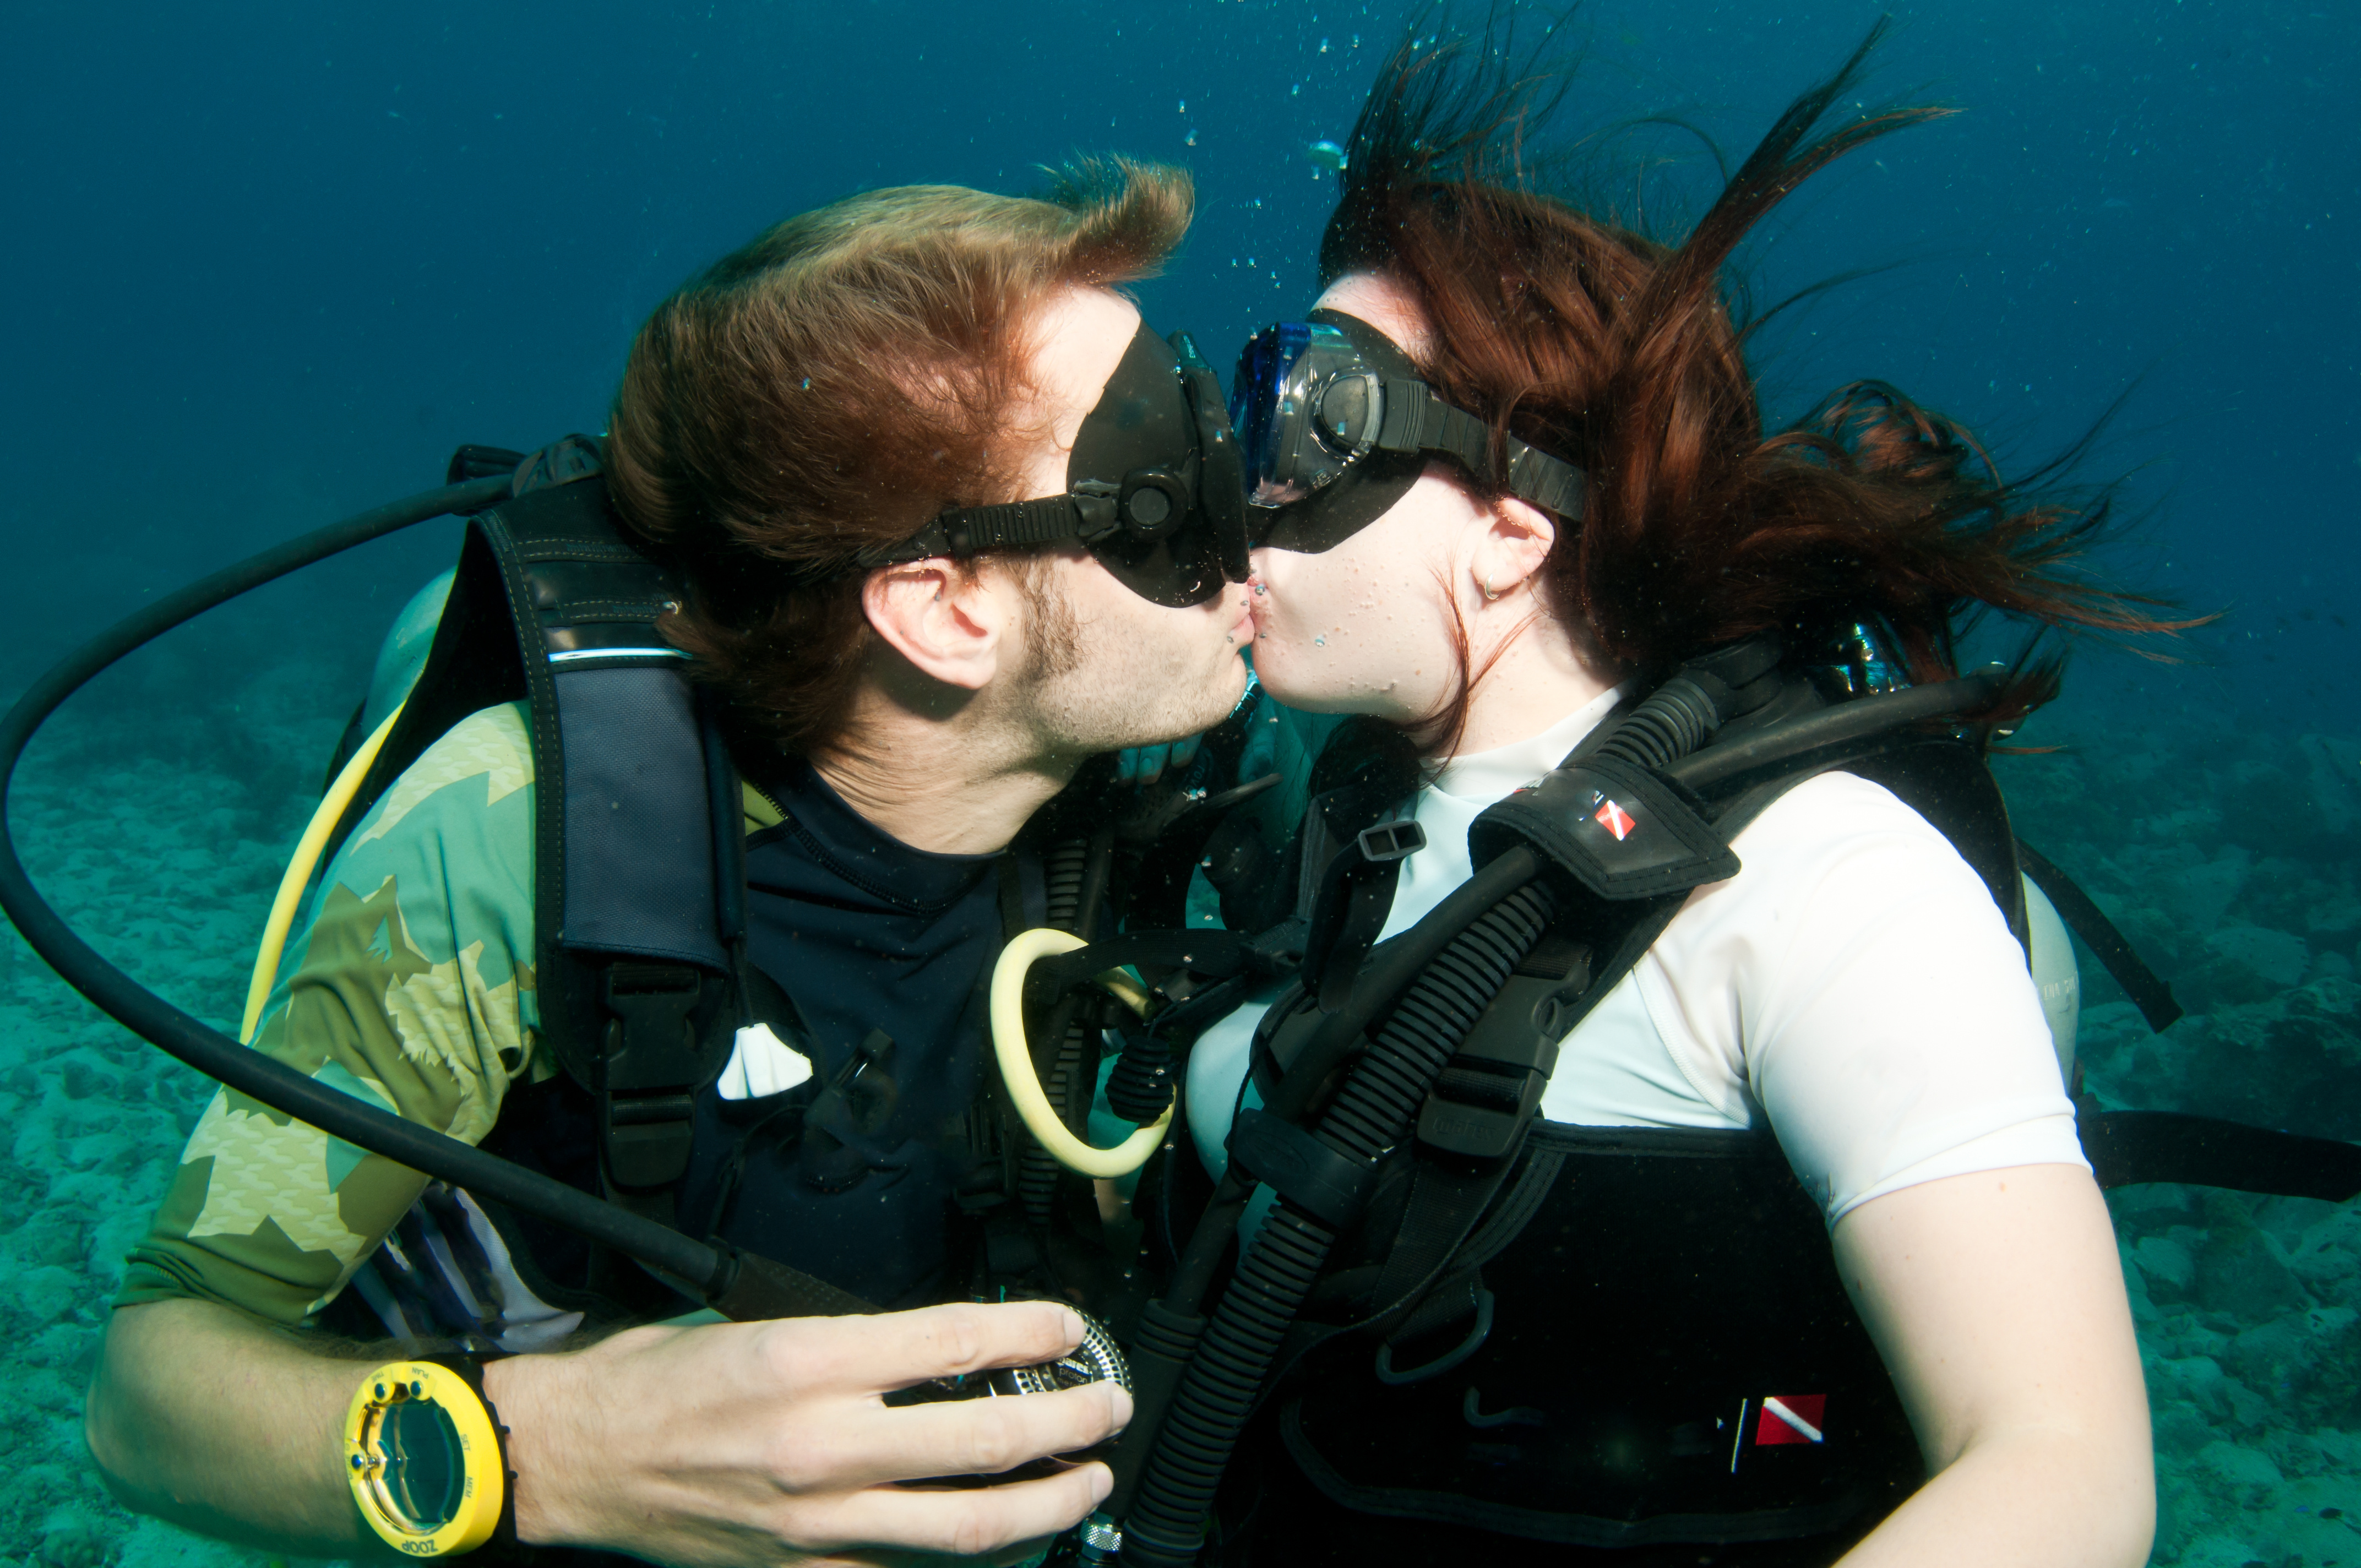 man and woman divers embrace eachother with and underwater kiss